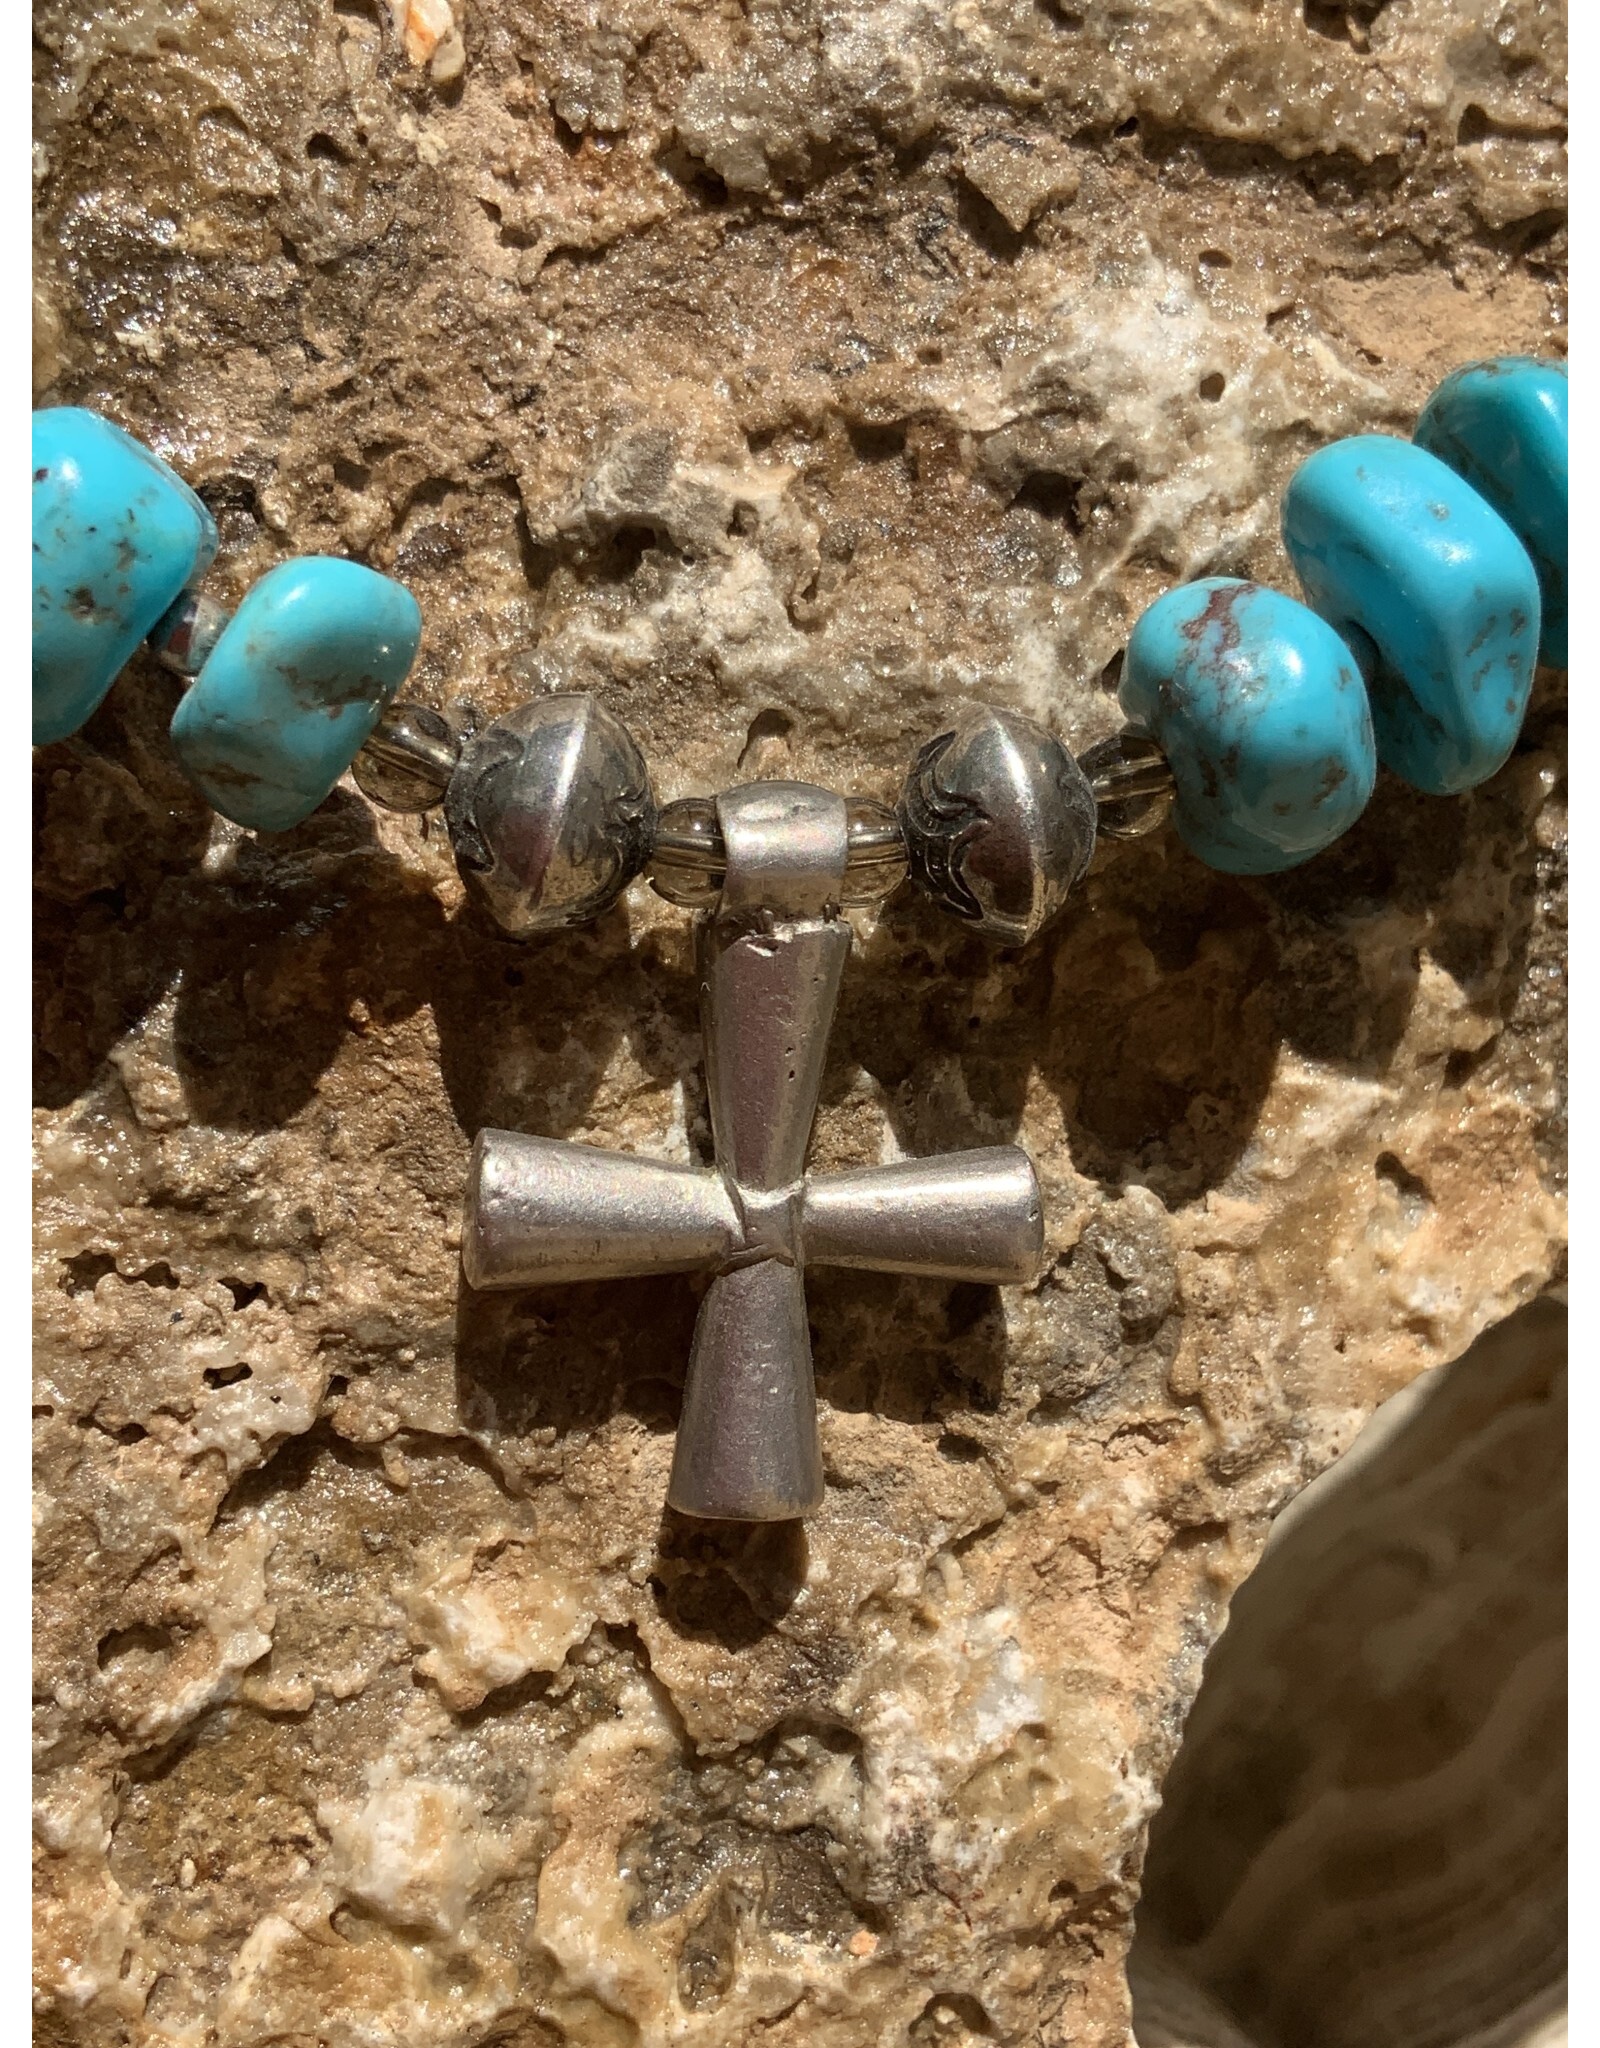 Annette Colby - Jeweler 18” SS Oxidized Beads w Turquoise 3 Crosses Necklace - AC